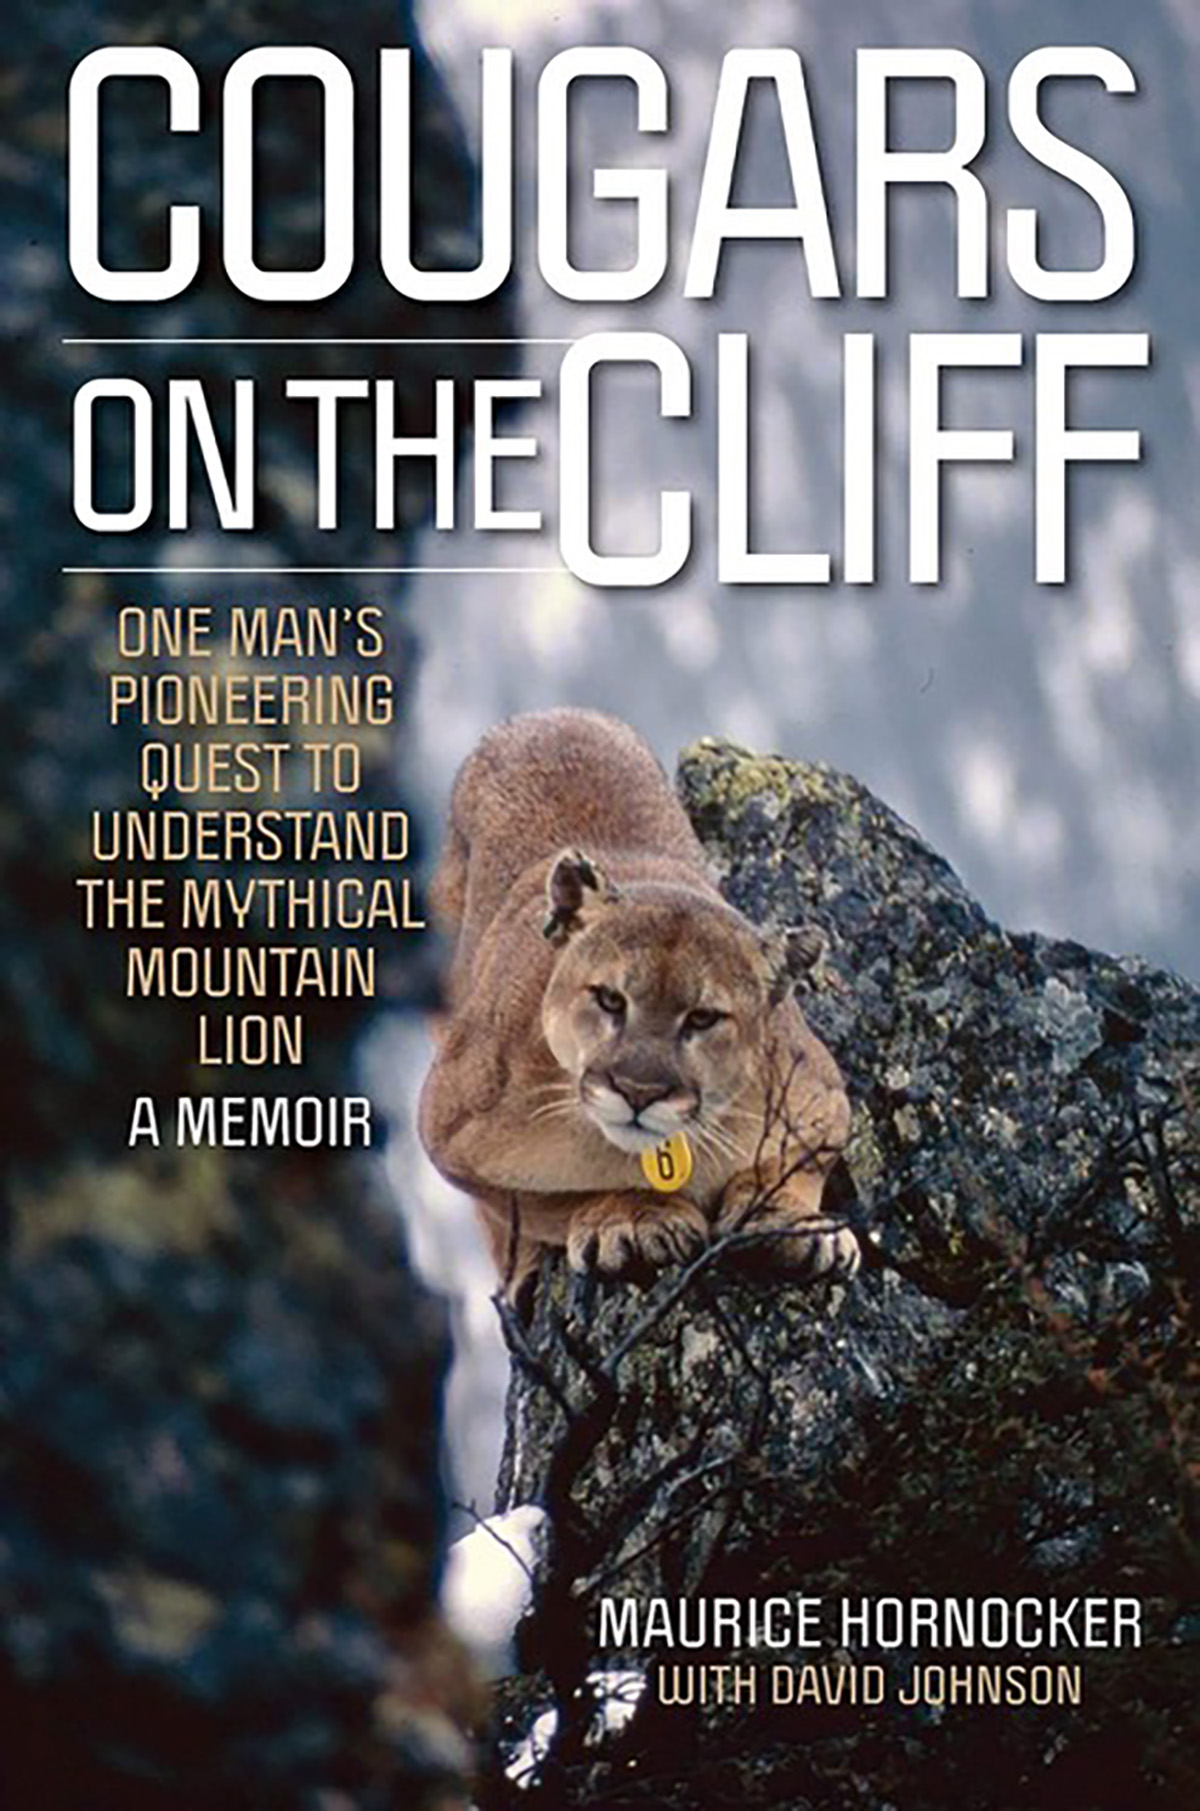  A book cover with a cougar, reading "Cougars on the Cliff."